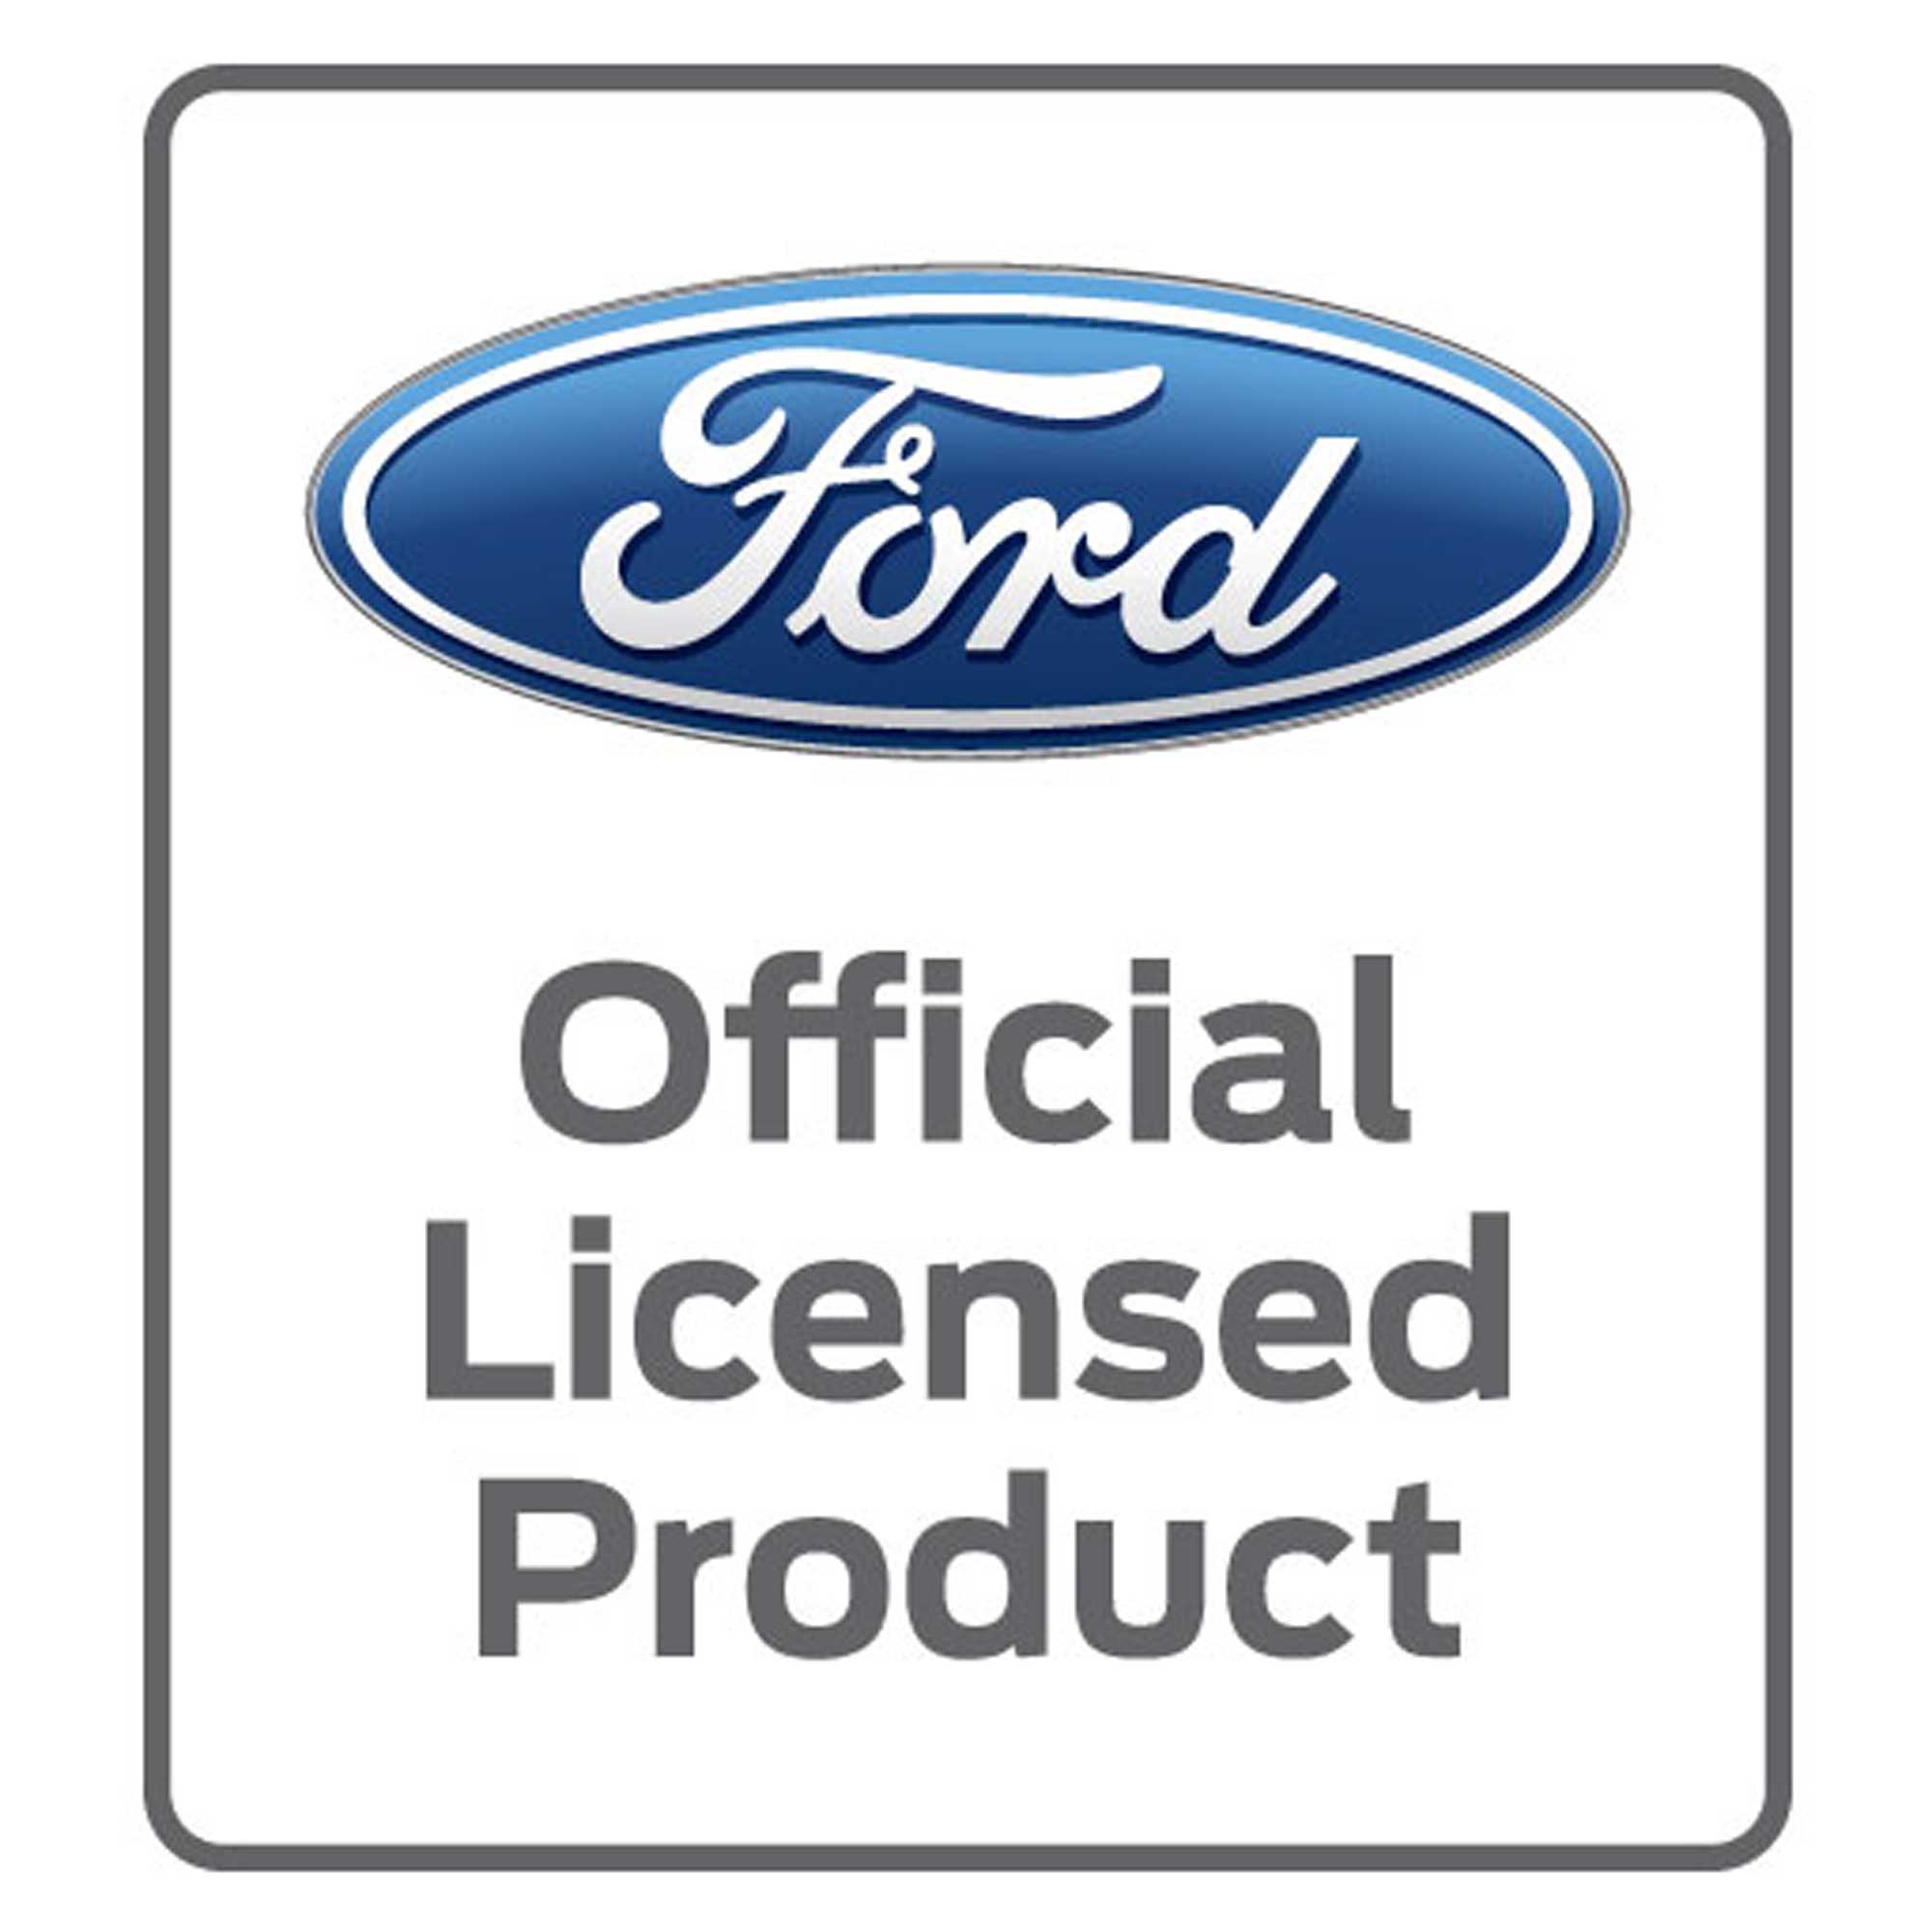 Official Ford Logo - Richbrook Officially Licensed Ford Logo Seat Cover - Hard Wearing ...